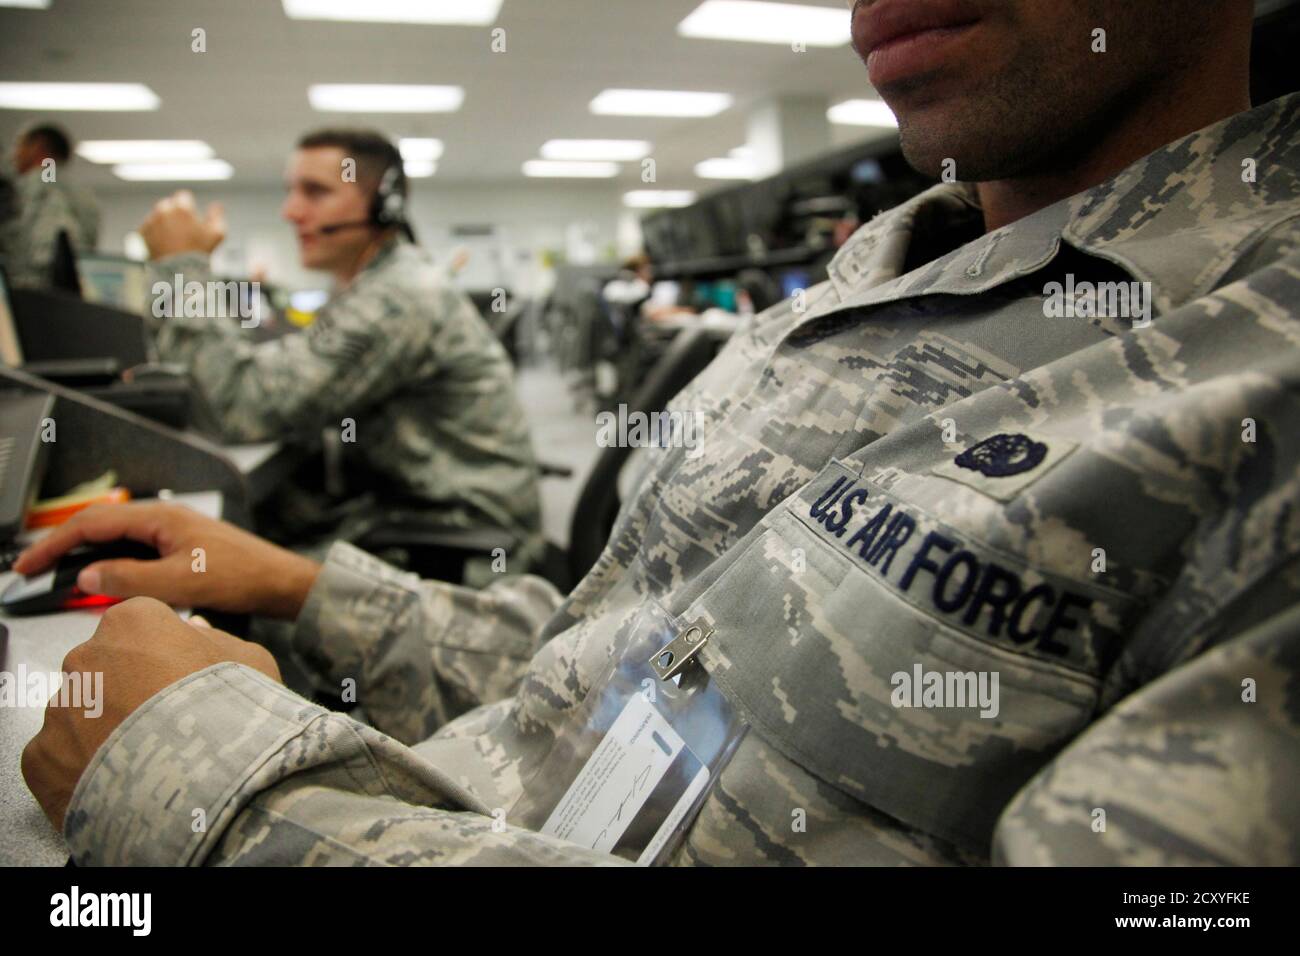 Personnel work at the Air Force Space Command Network Operations & Security Center at Peterson Air Force Base in Colorado Springs, Colorado July 20, 2010. U.S. national security planners are proposing that the 21st century's critical infrastructure -- power grids, communications, water utilities, financial networks -- be similarly shielded from cyber marauders and other foes. The ramparts would be virtual, their perimeters policed by the Pentagon and backed by digital weapons capable of circling the globe in milliseconds to knock out targets.  To match Special Report  USA-CYBERWAR/          RE Stock Photo